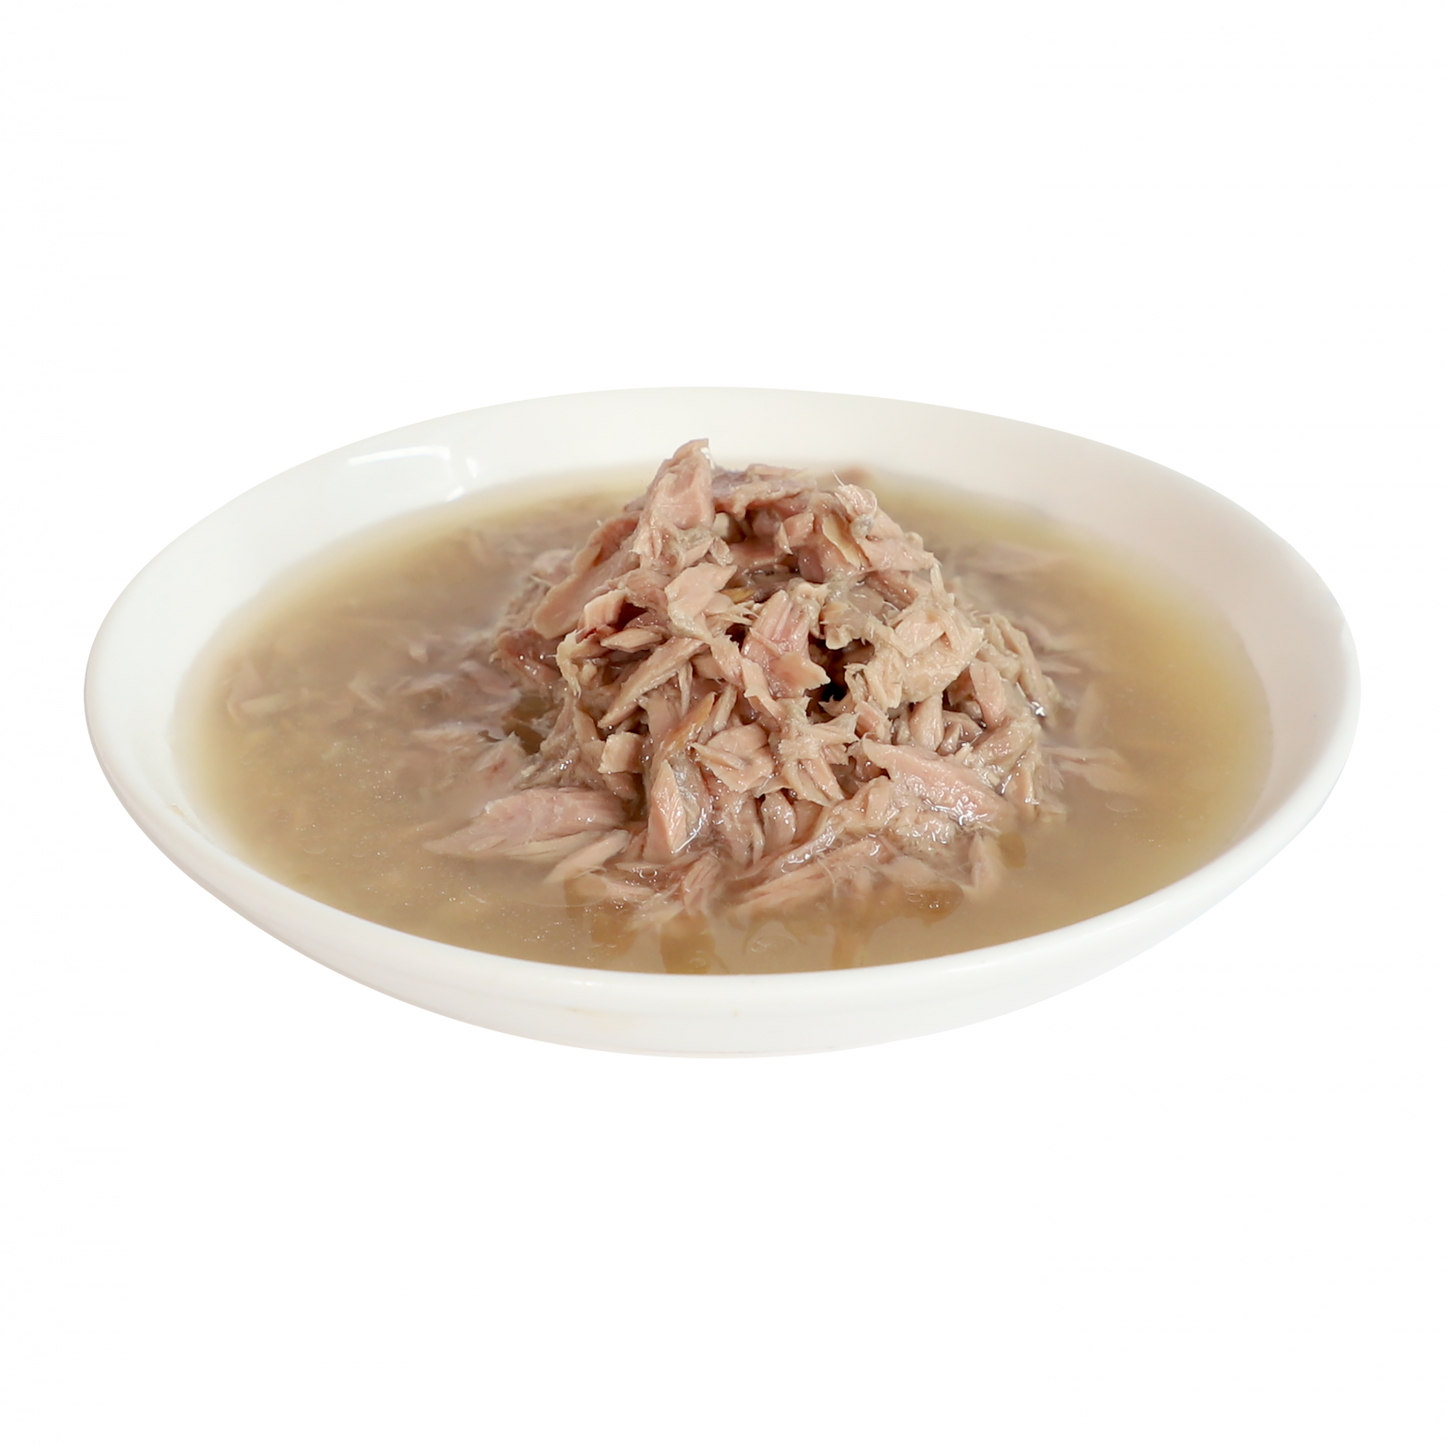 Complete Cuisine Tuna And Chia Seed In Broth